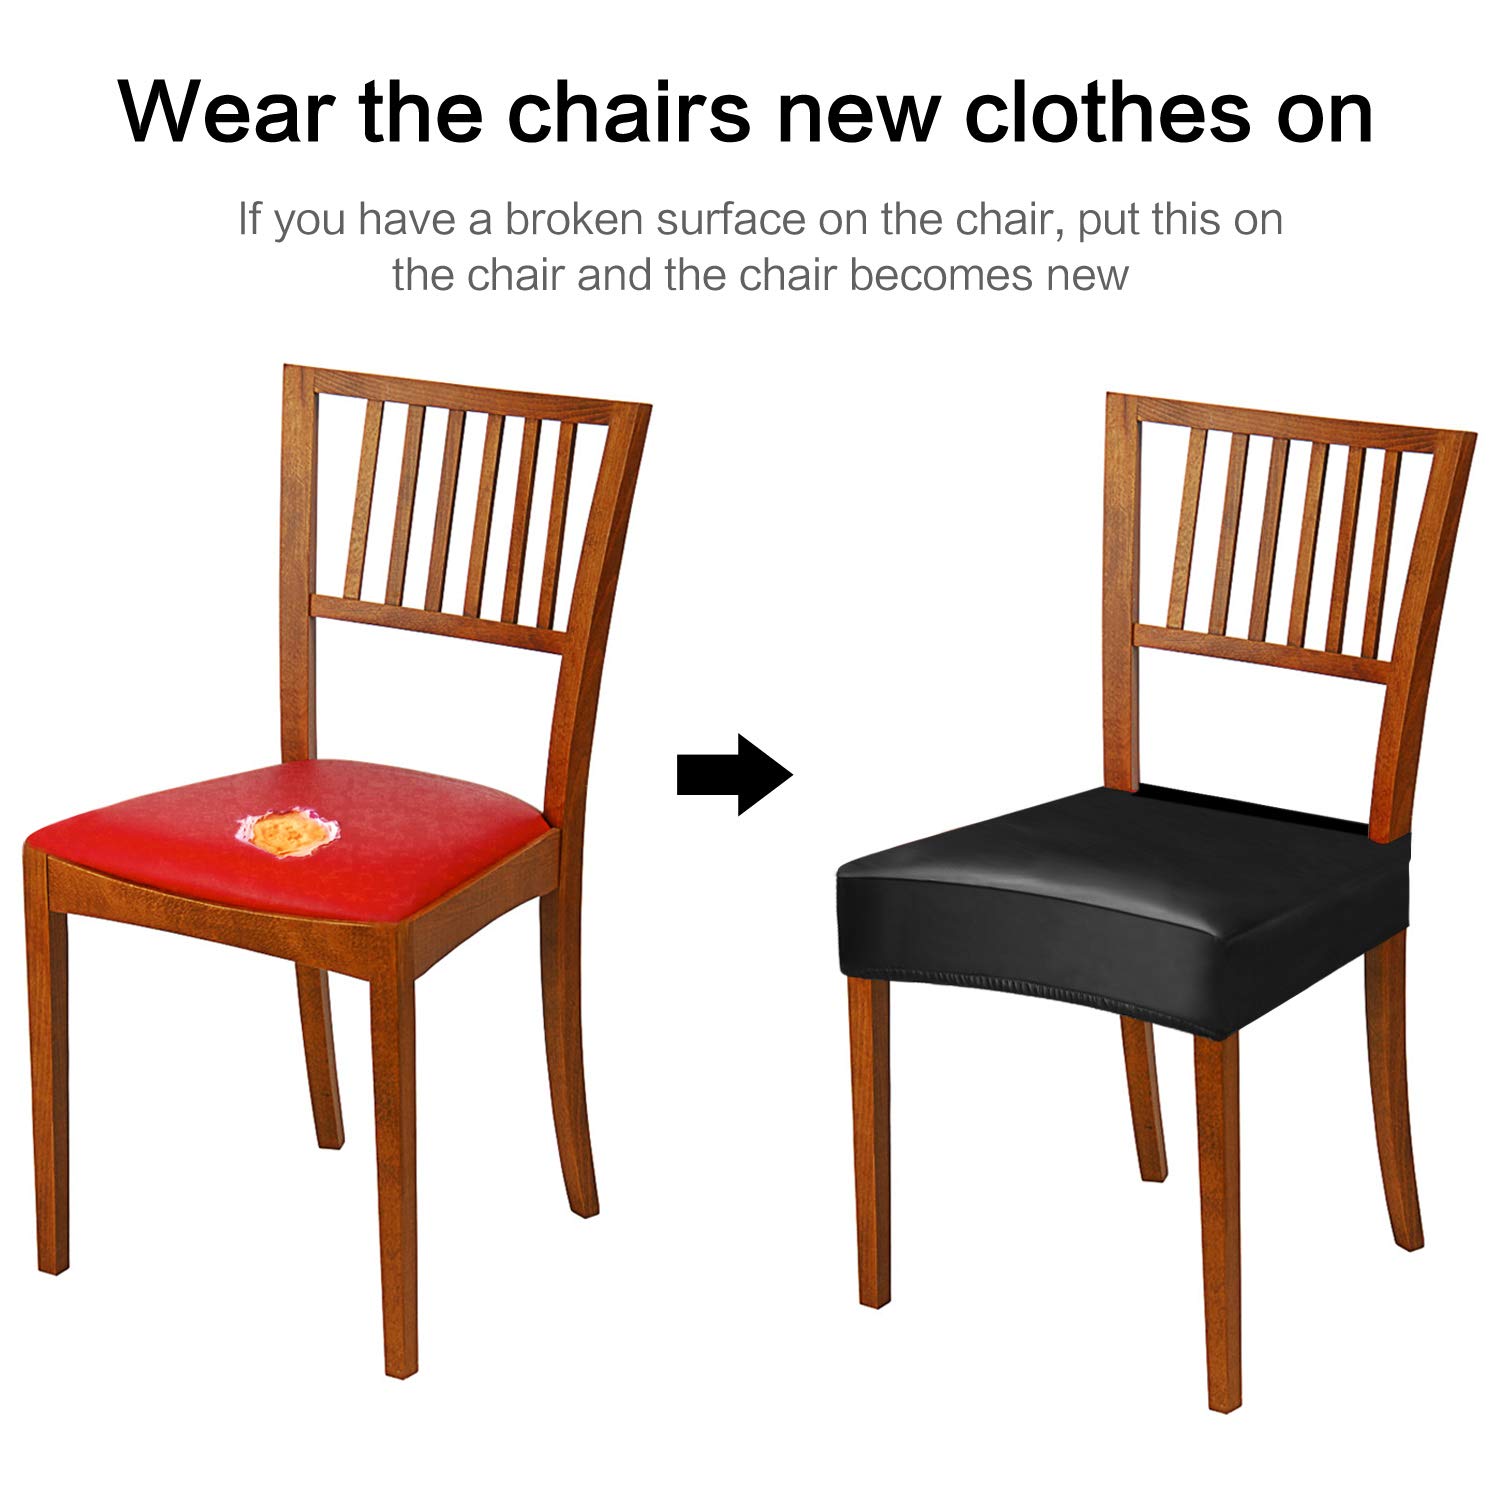 How to Choose the Best Waterproof Dining Chair Covers: 10 Must-Know Tips